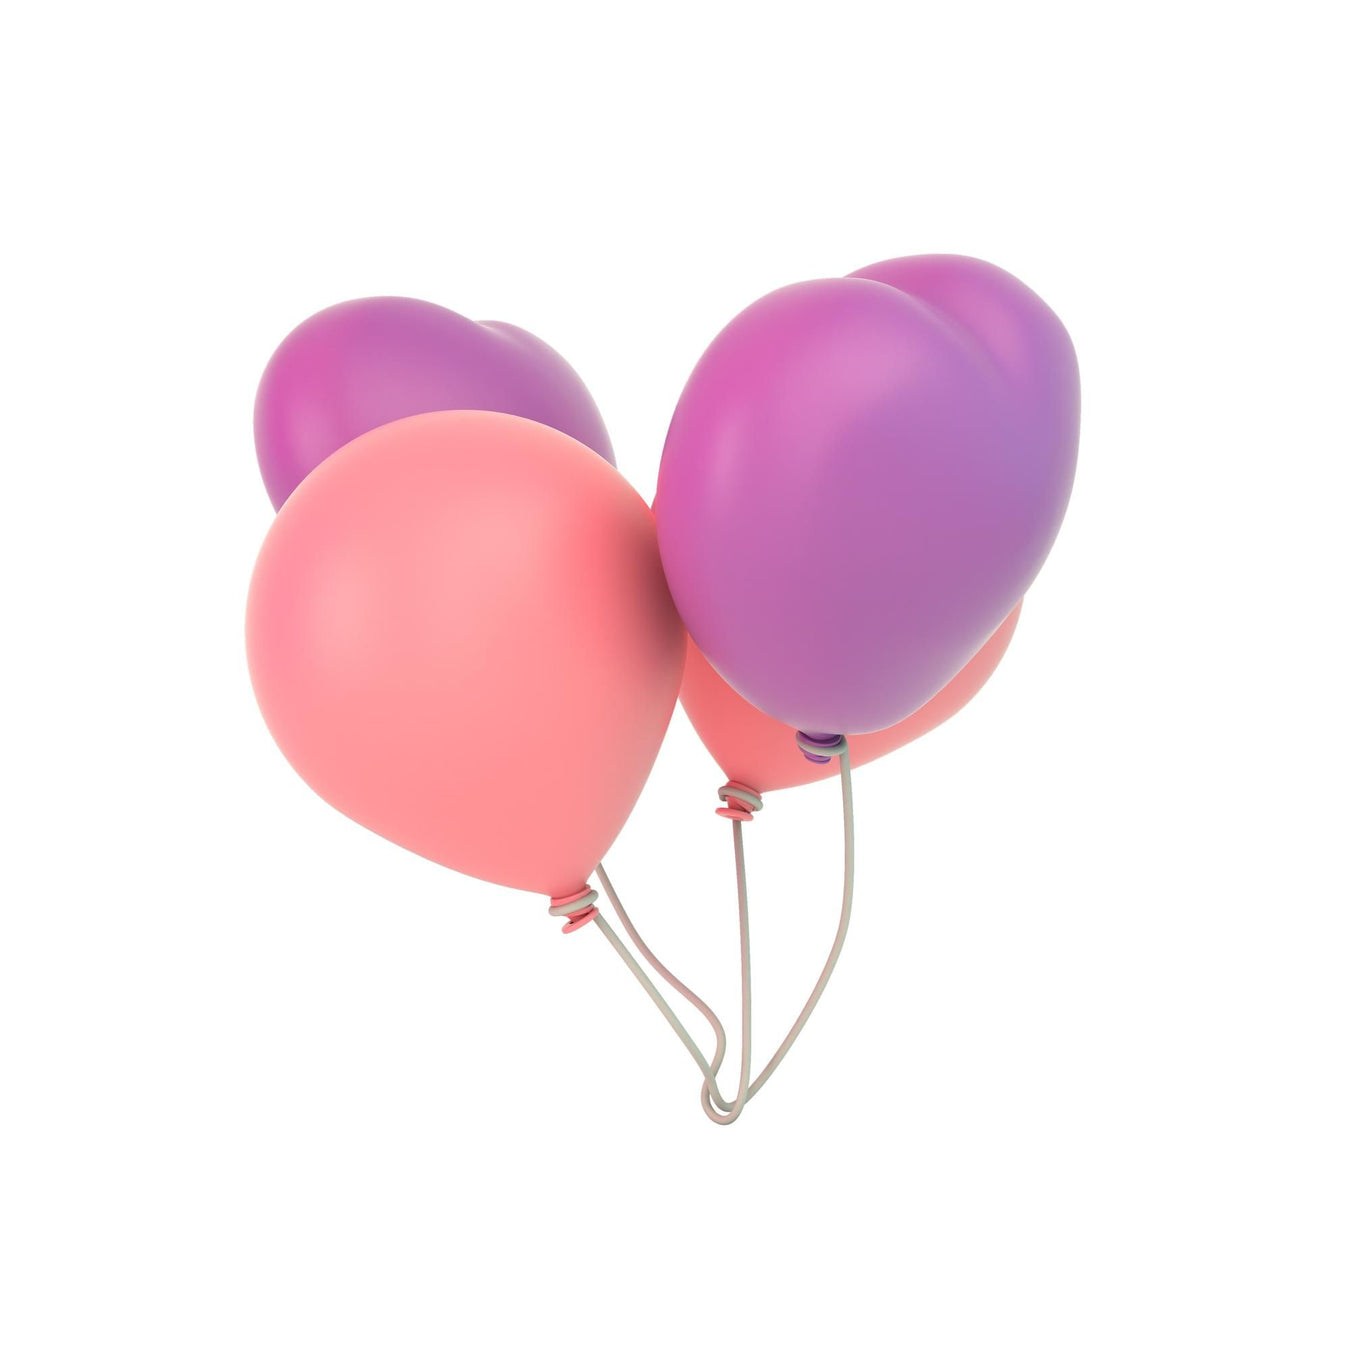 Buy High-Quality Latex Balloons for Parties and Decorations